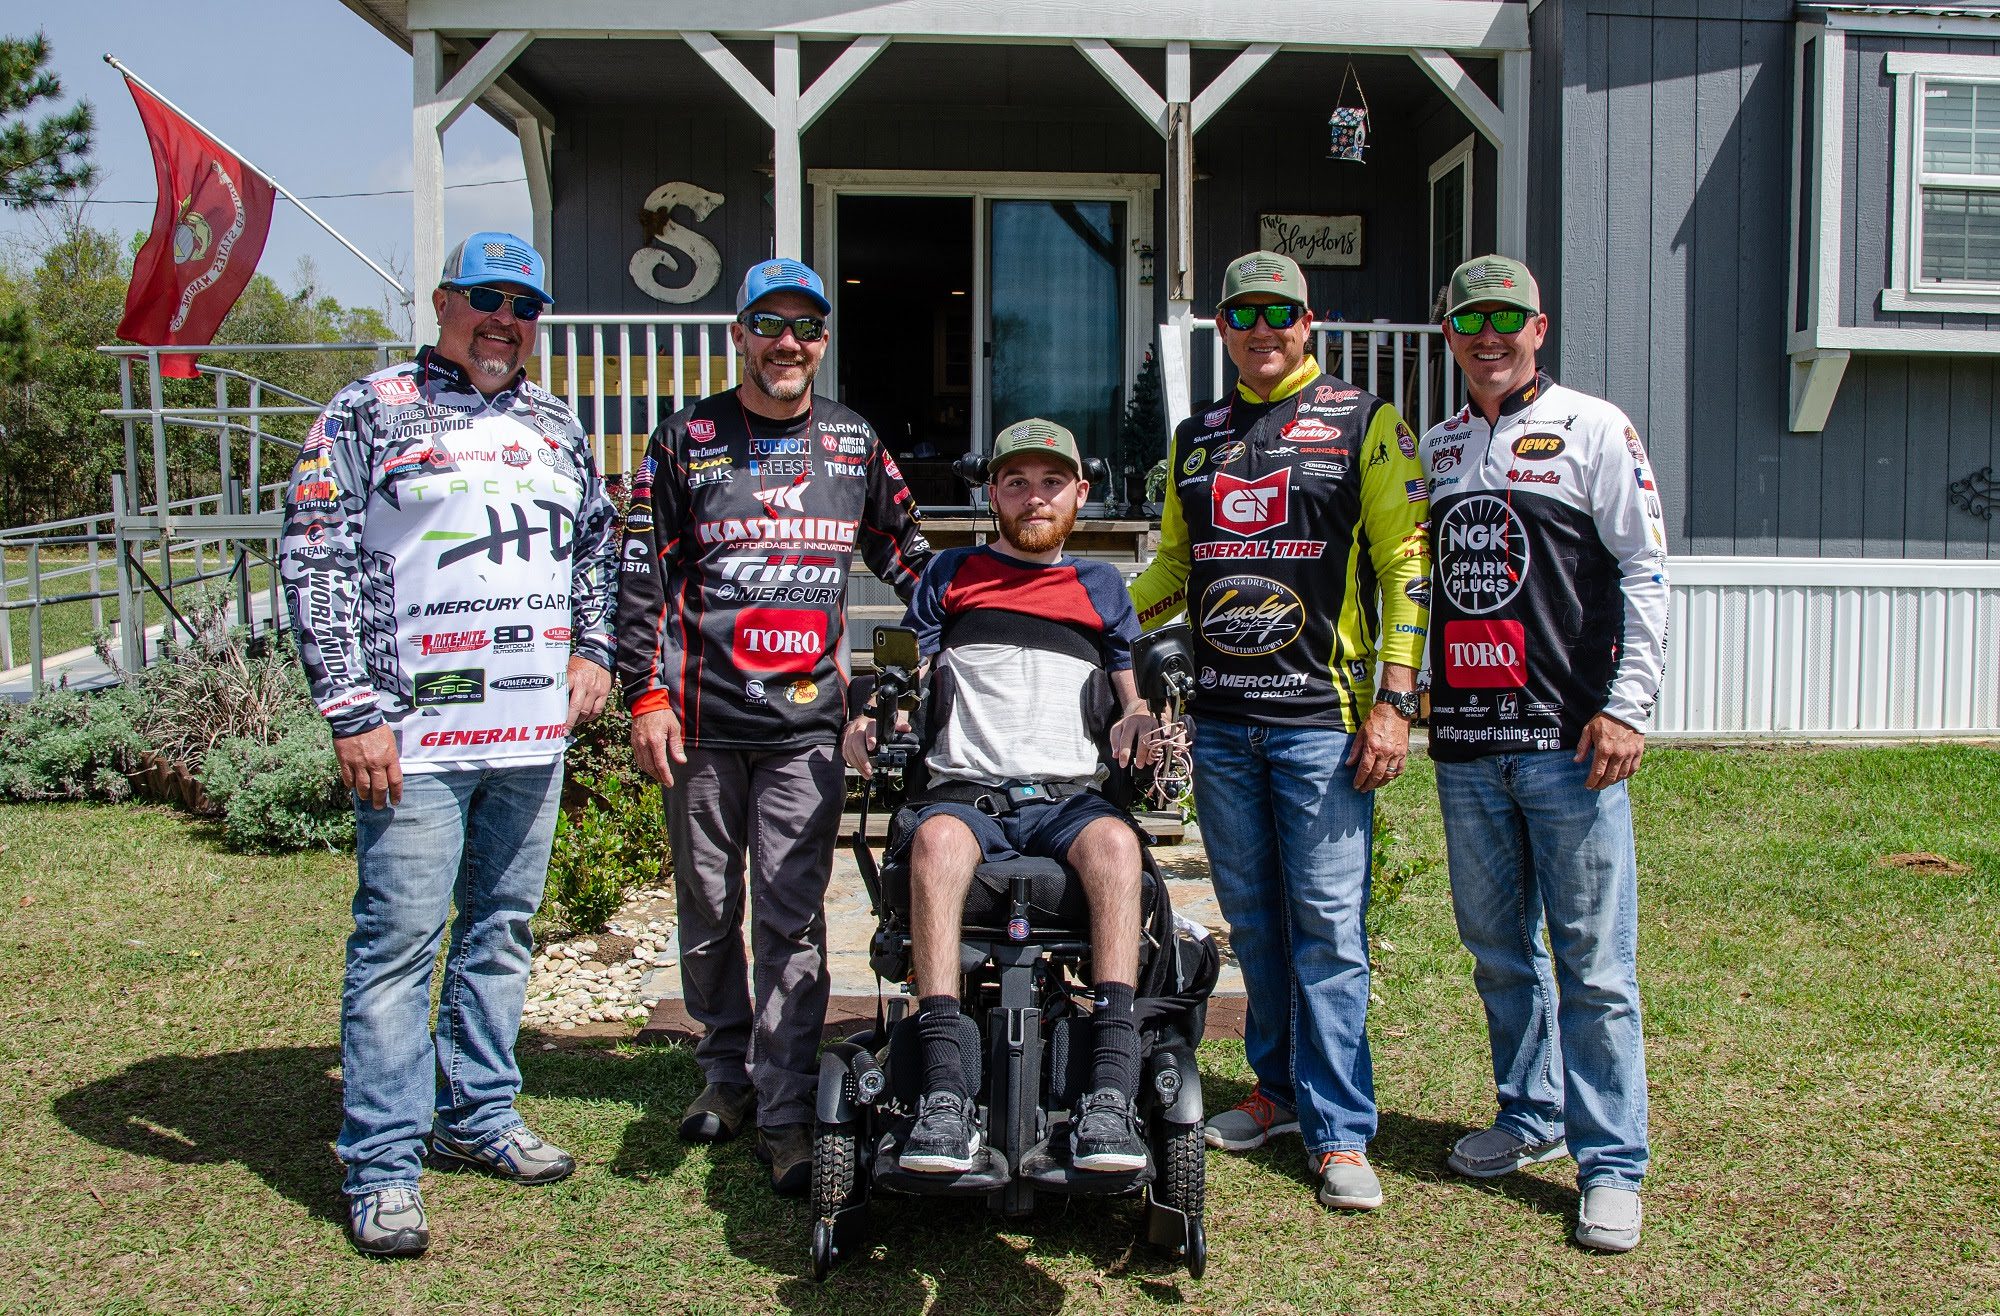 Major League Fishing Pros Partner With Toro For Spring Clean Up At Texas Marine’s Residence